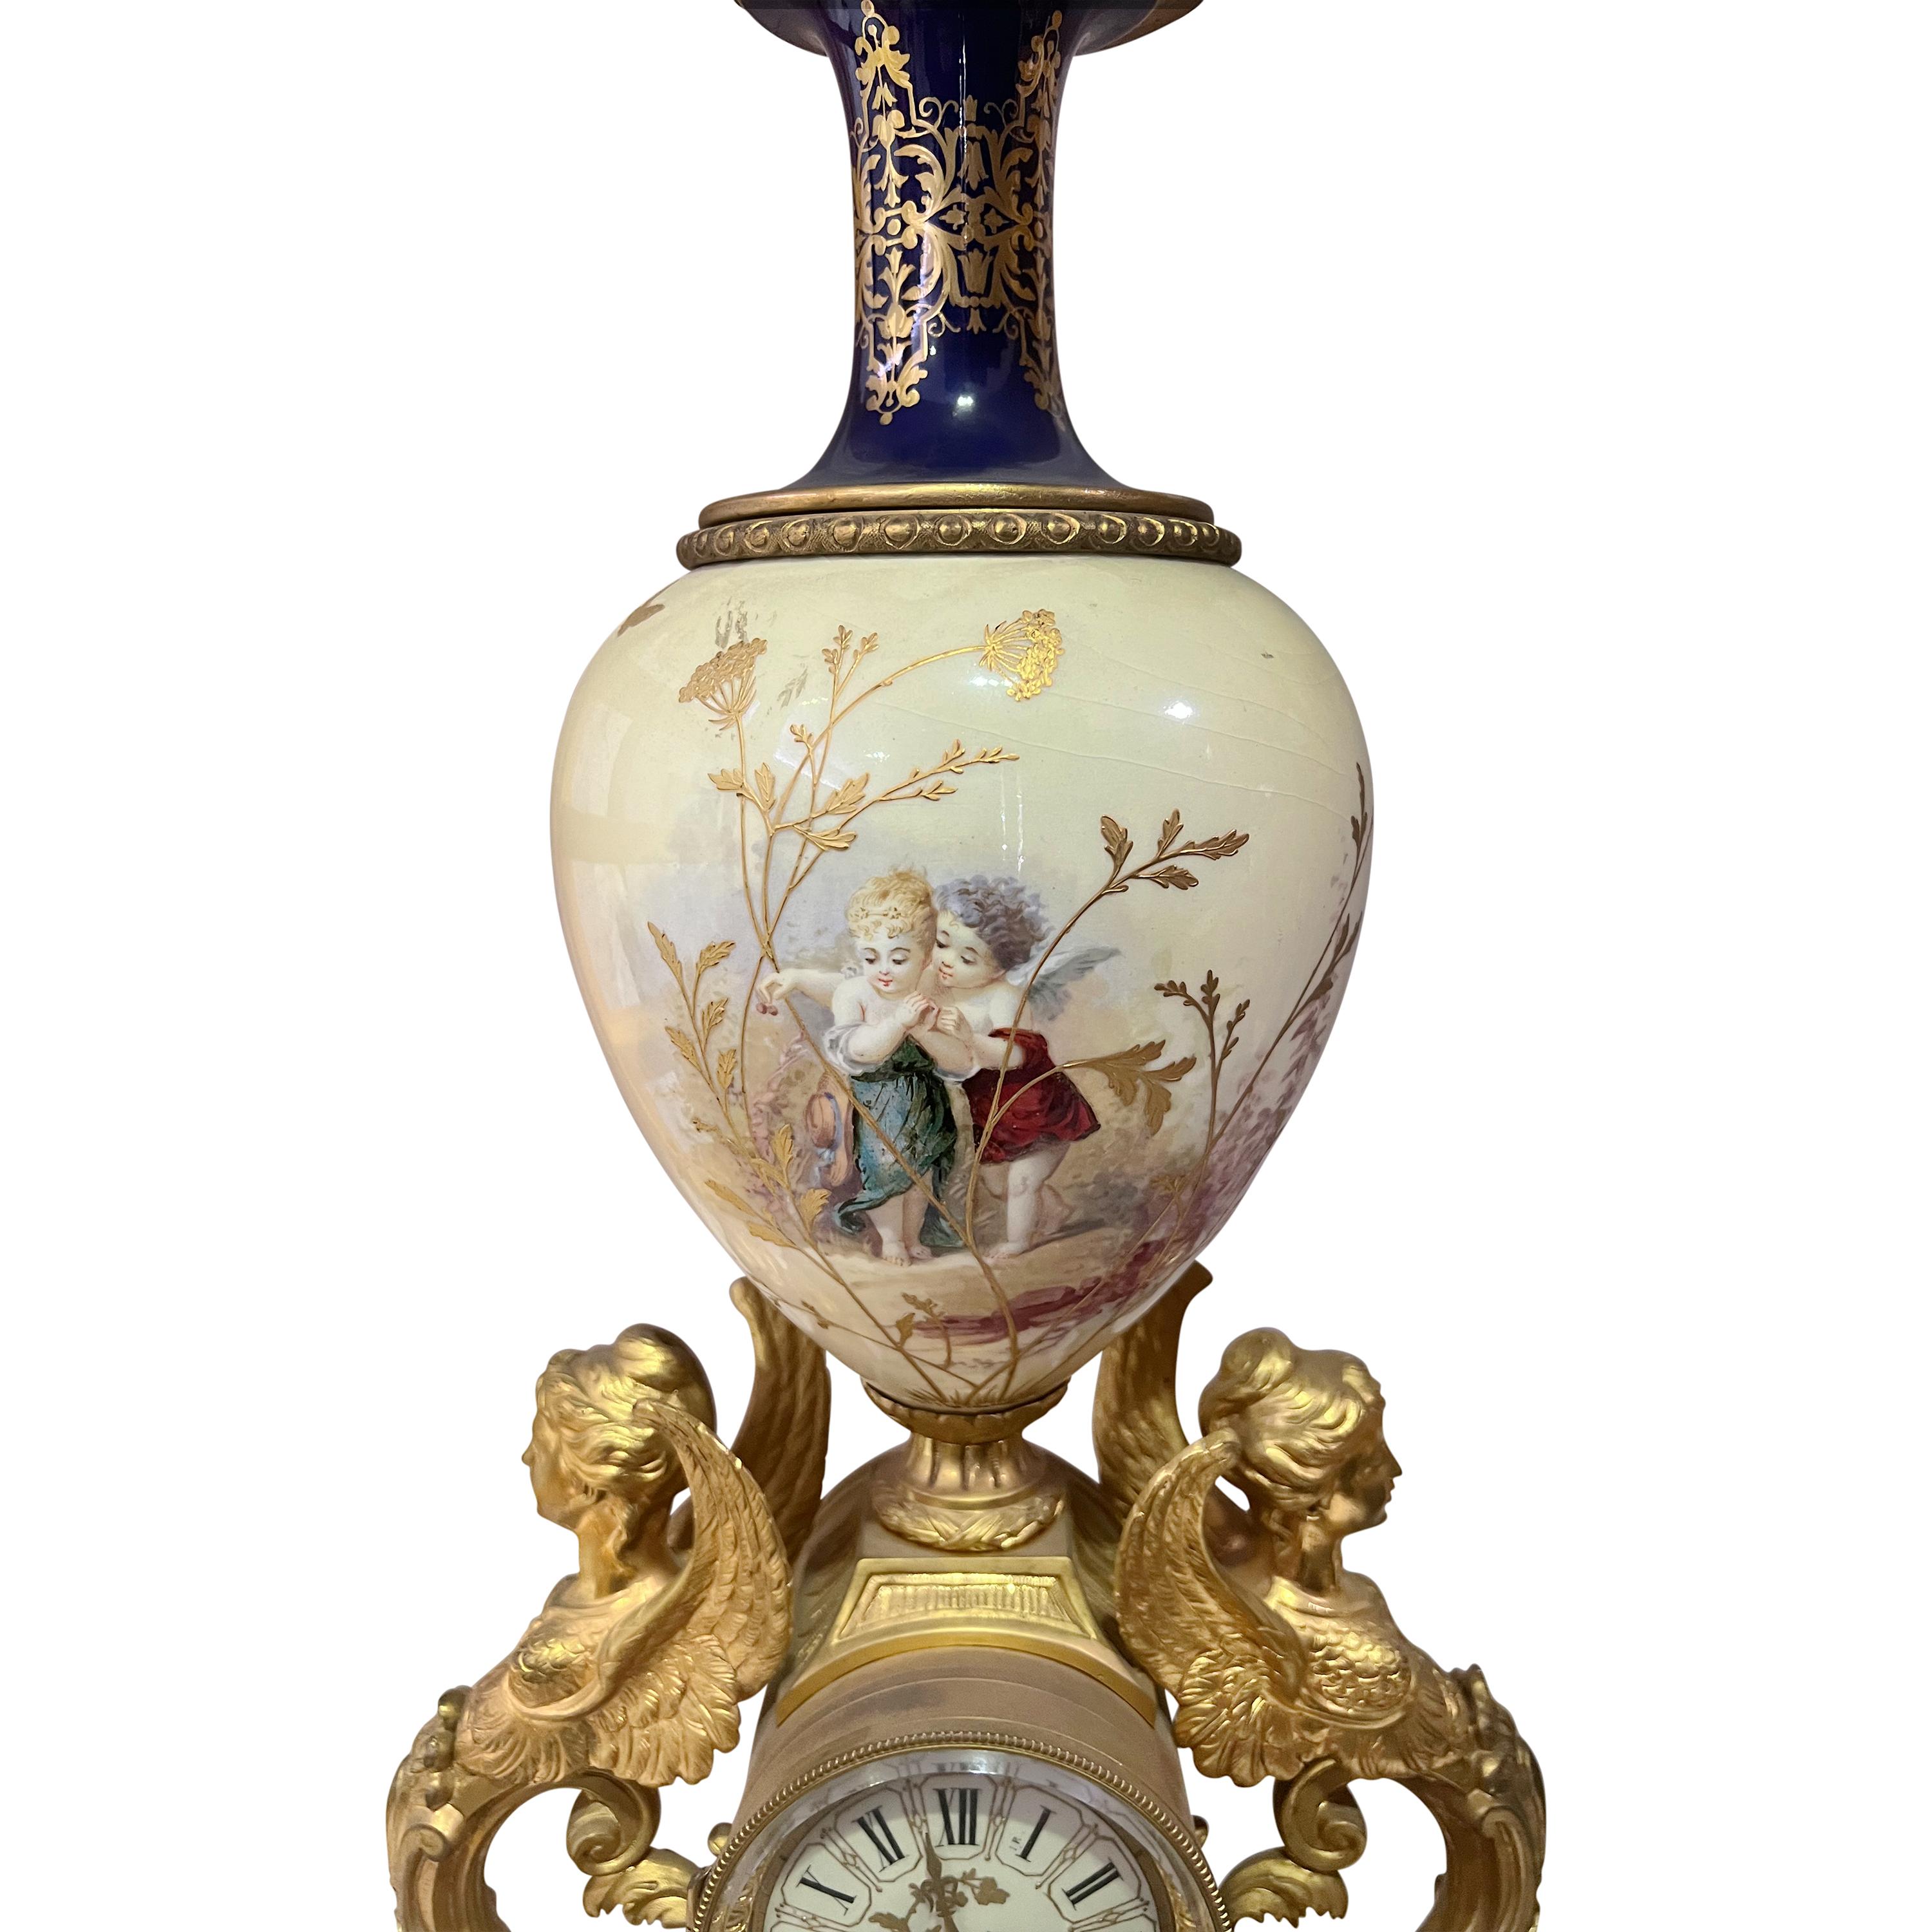 Louis XV A 19th Century Gilt Bronze & Porcelain Mantel Clock Retailed by Tiffany & Co. For Sale